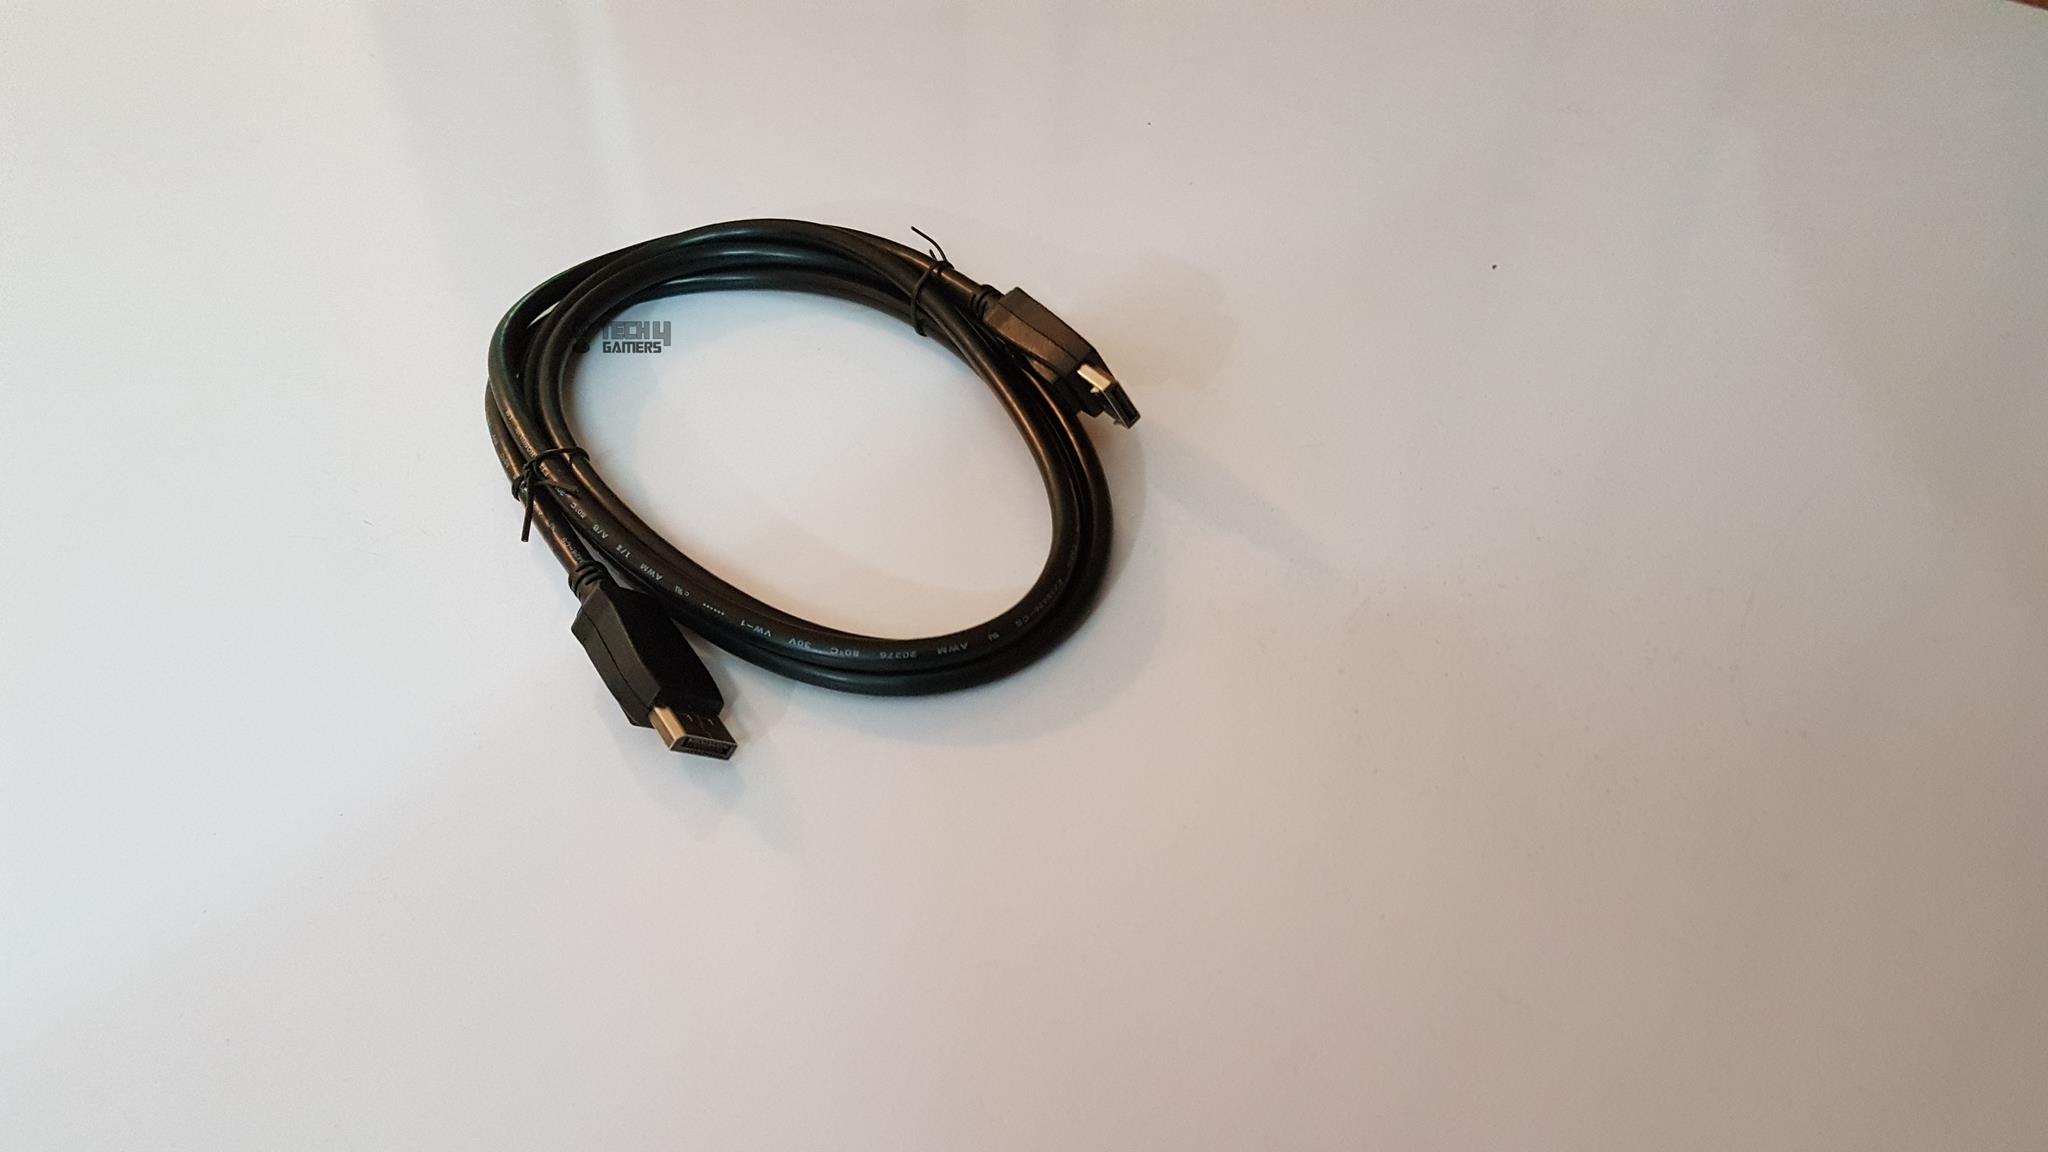 Benq 144 Hz Monitor Connectivity Display port cable 